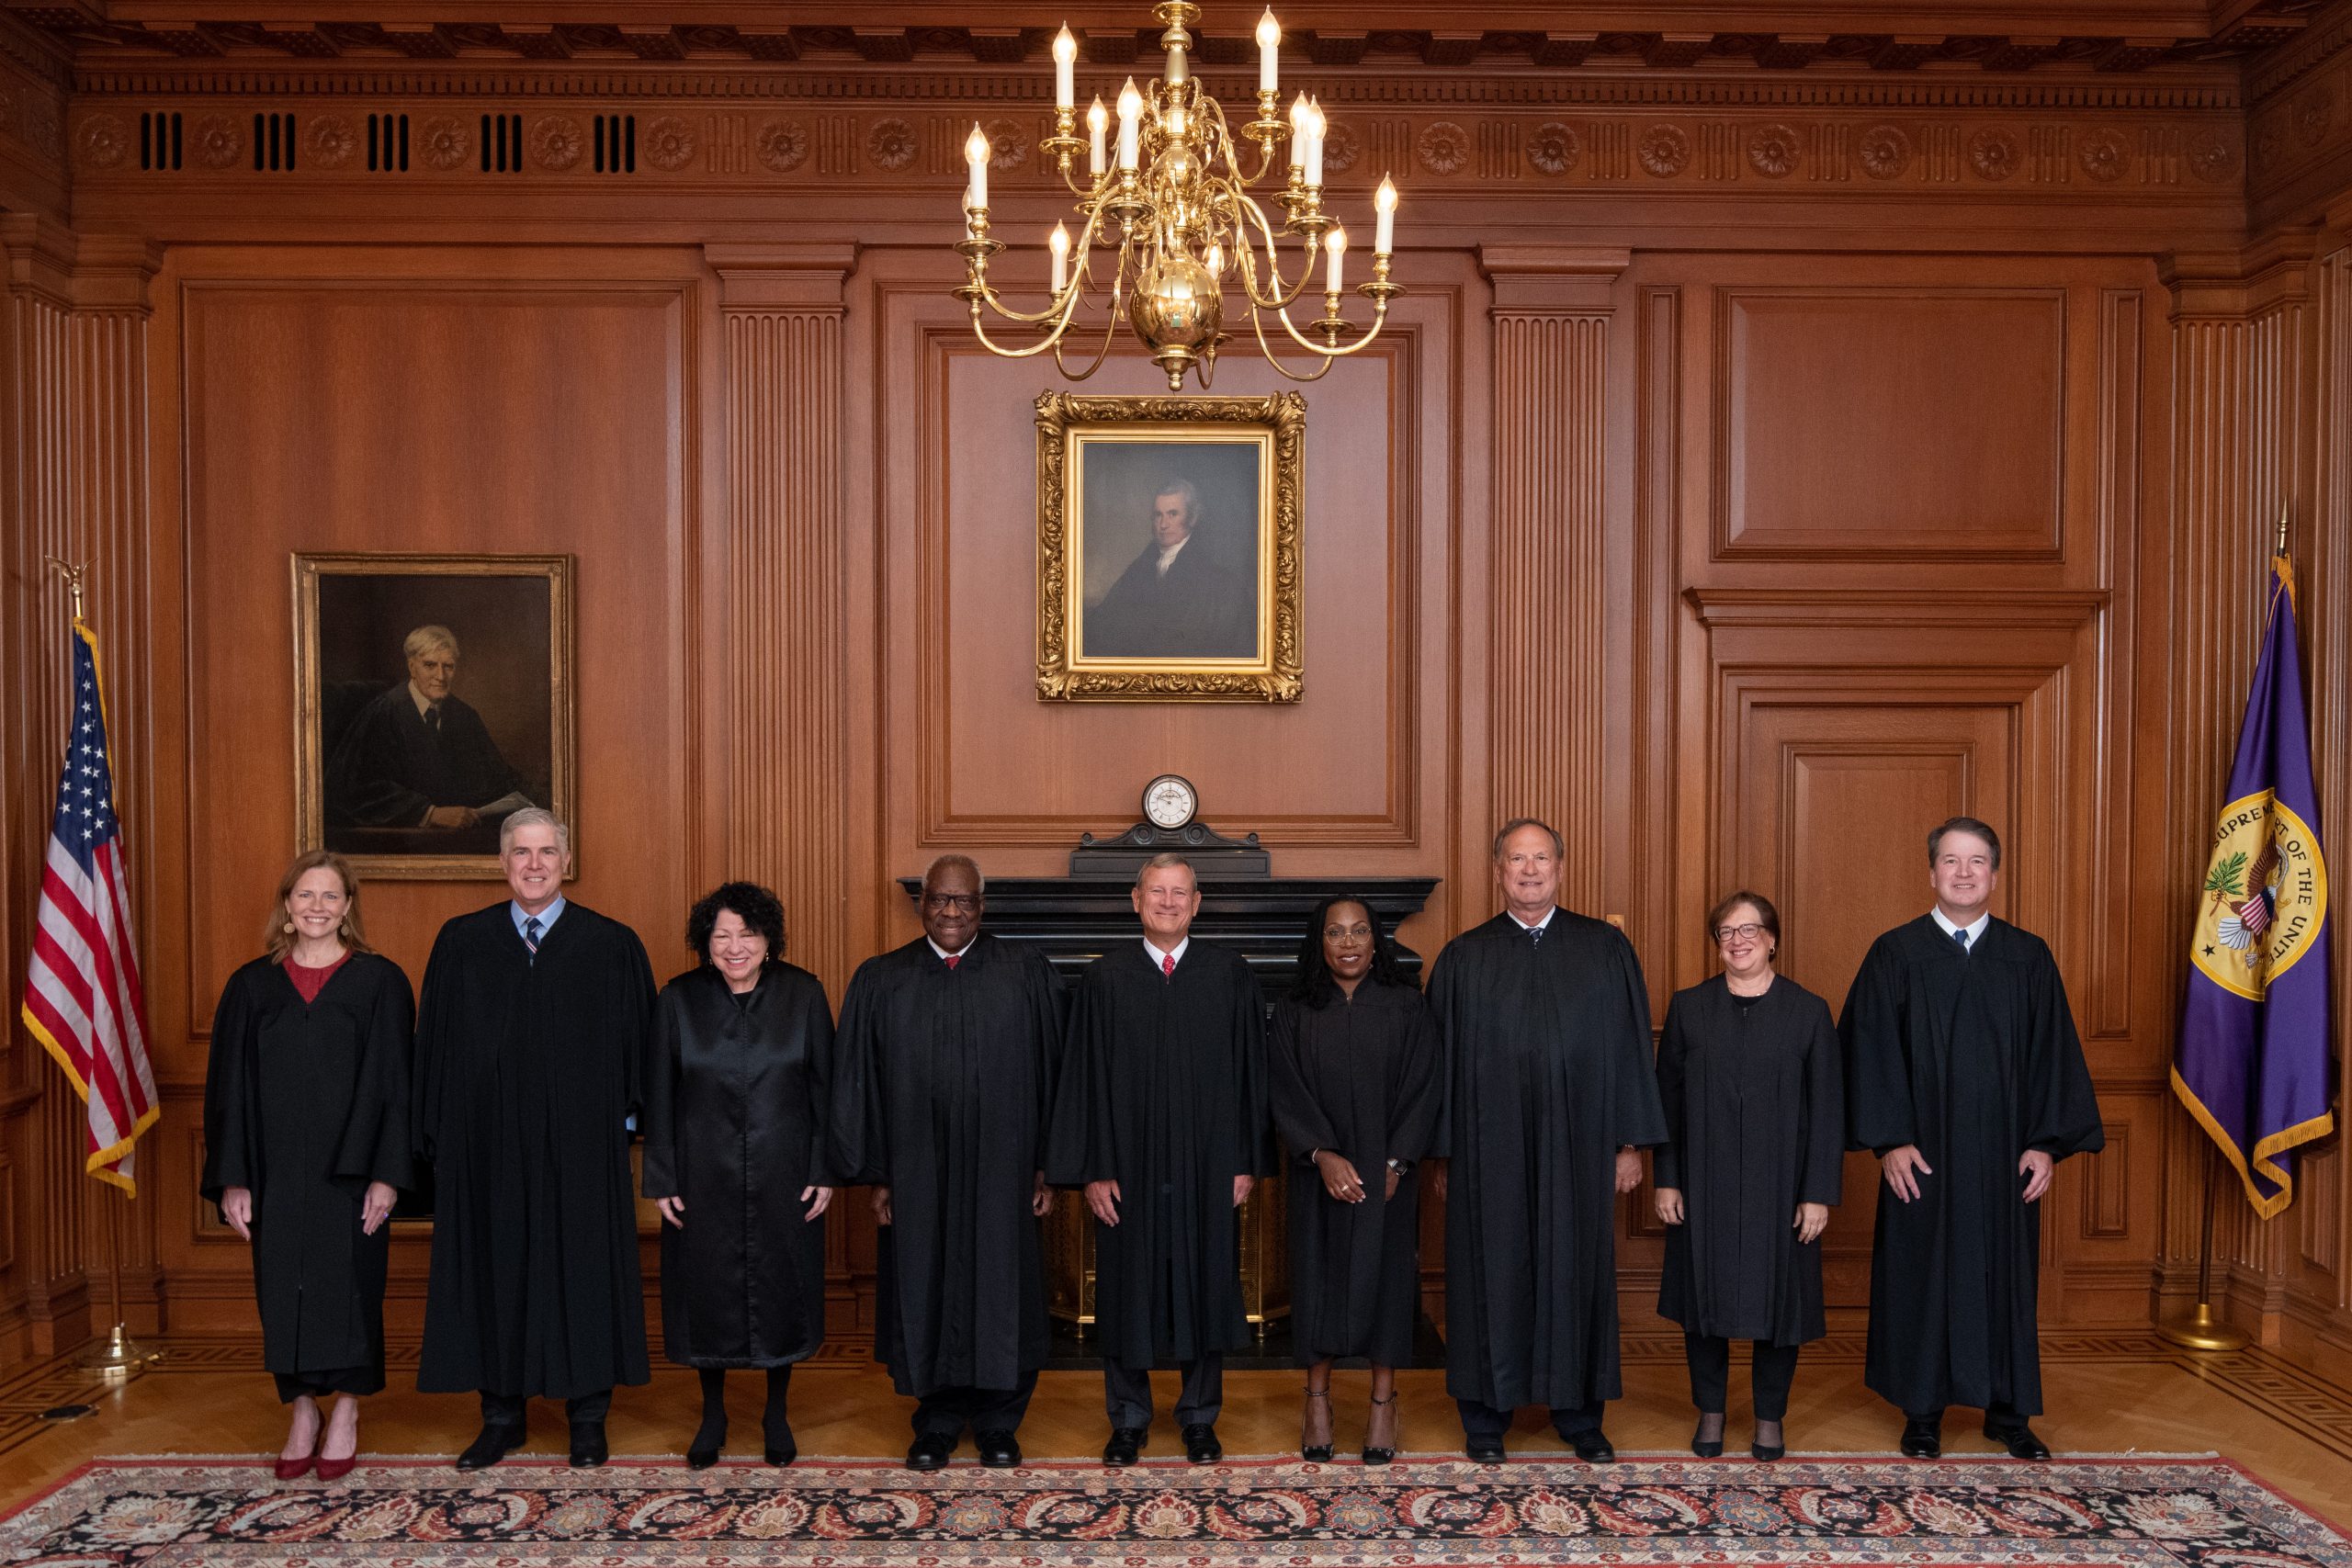 nine justices standing side by side, wearing black judicial robes.